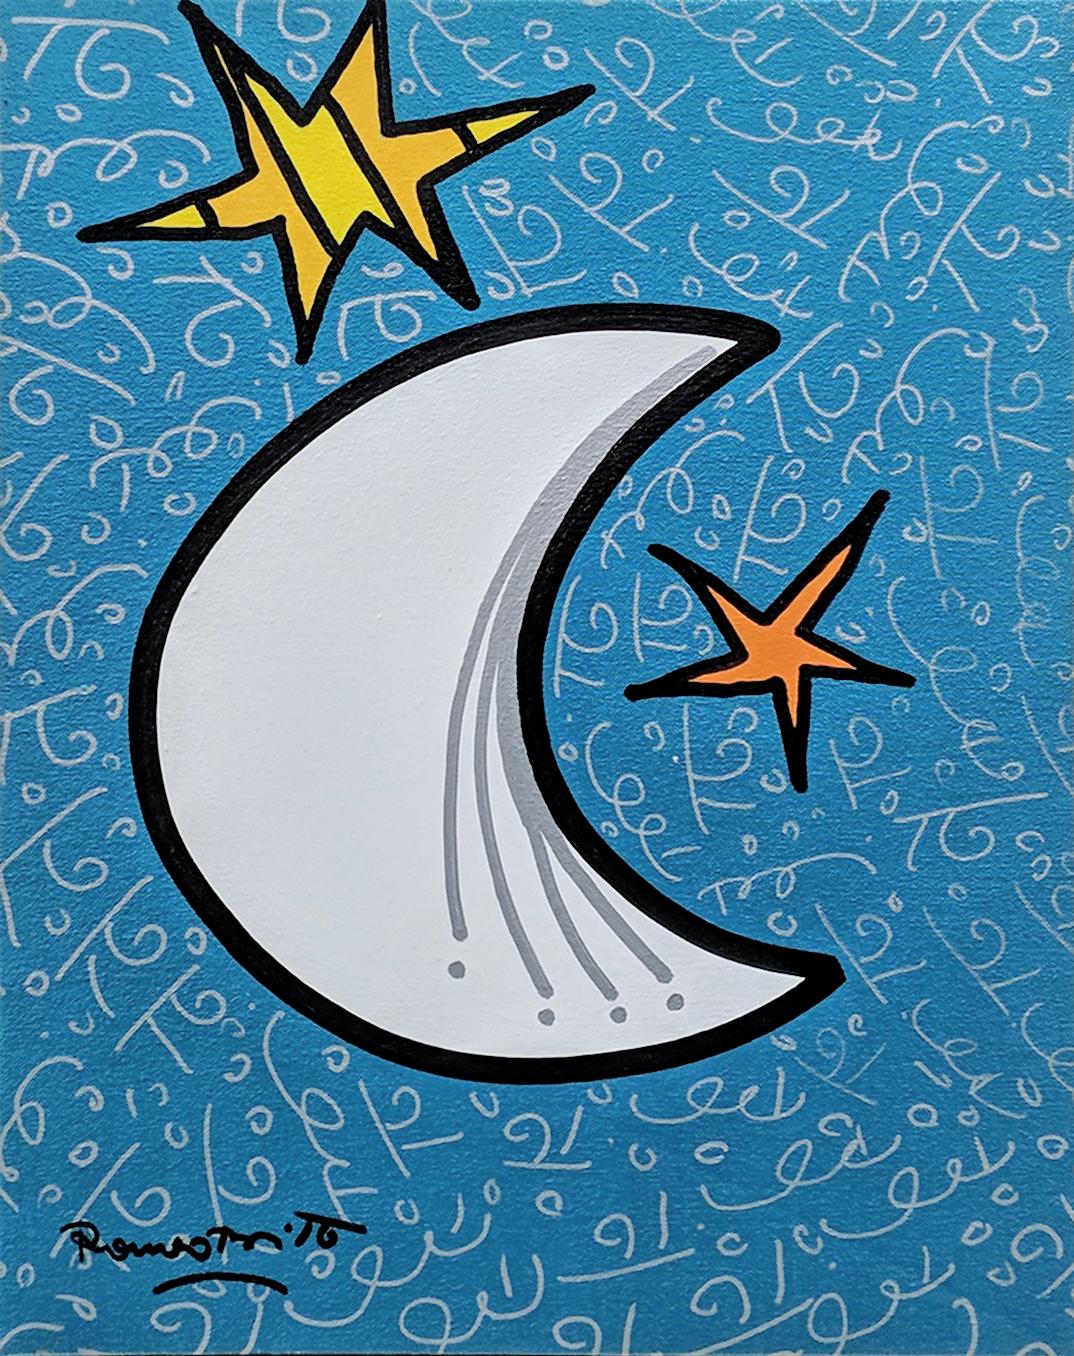 OVER THE MOON - Painting by Romero Britto